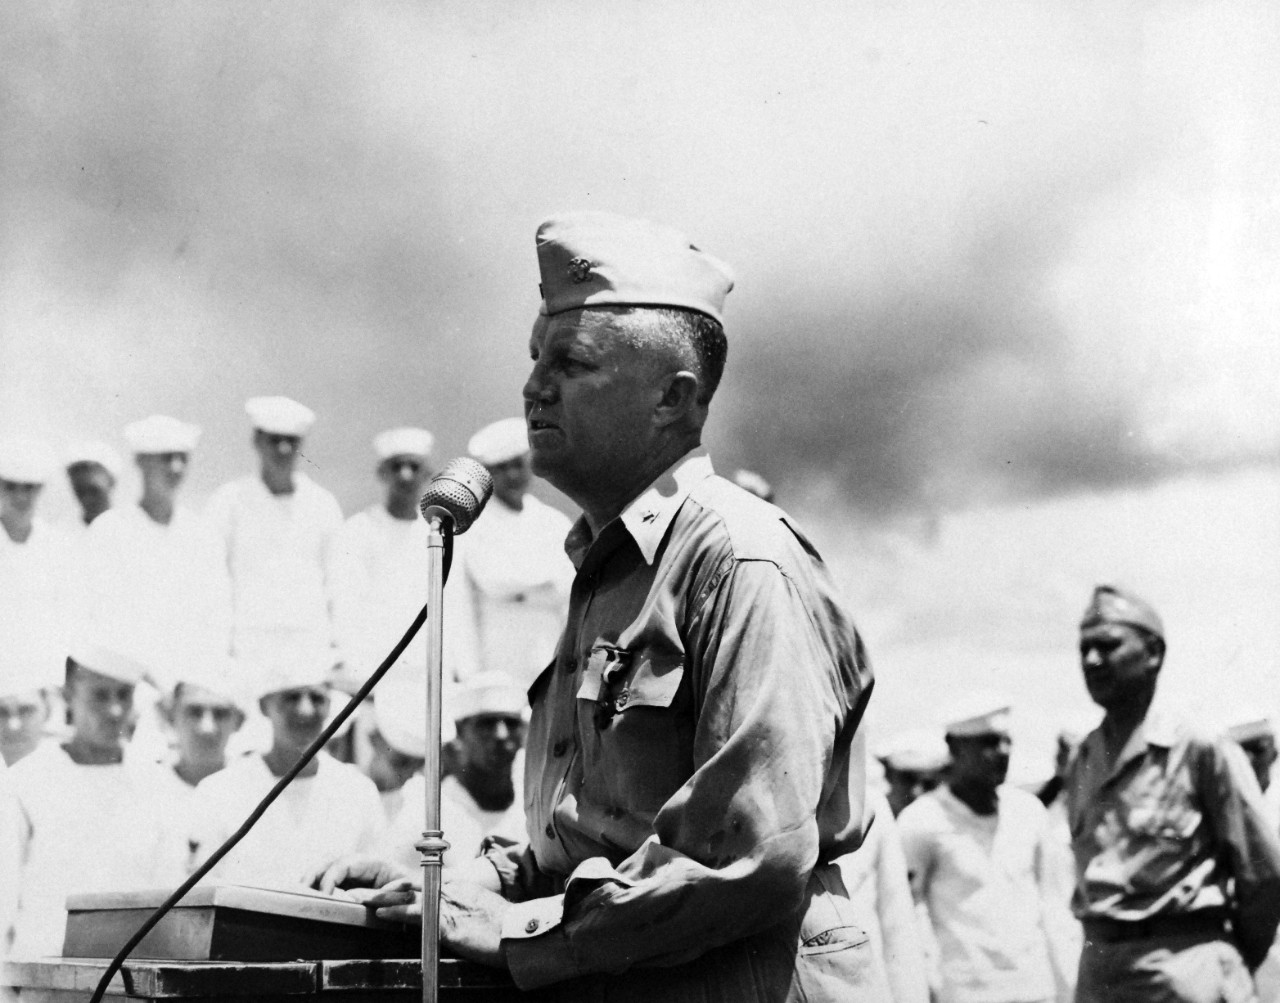 Capt. Frank E. Beatty giving a thank you speech upon presentation of his Navy Cross, and crew awards associated with the 1-2 November 1943 Battle of Empress Augusta Bay, 1 February 1944. (U.S. Navy Photograph 80-G-216848, National Archives and Records Administration, Still Pictures Branch, College Park, Md.)